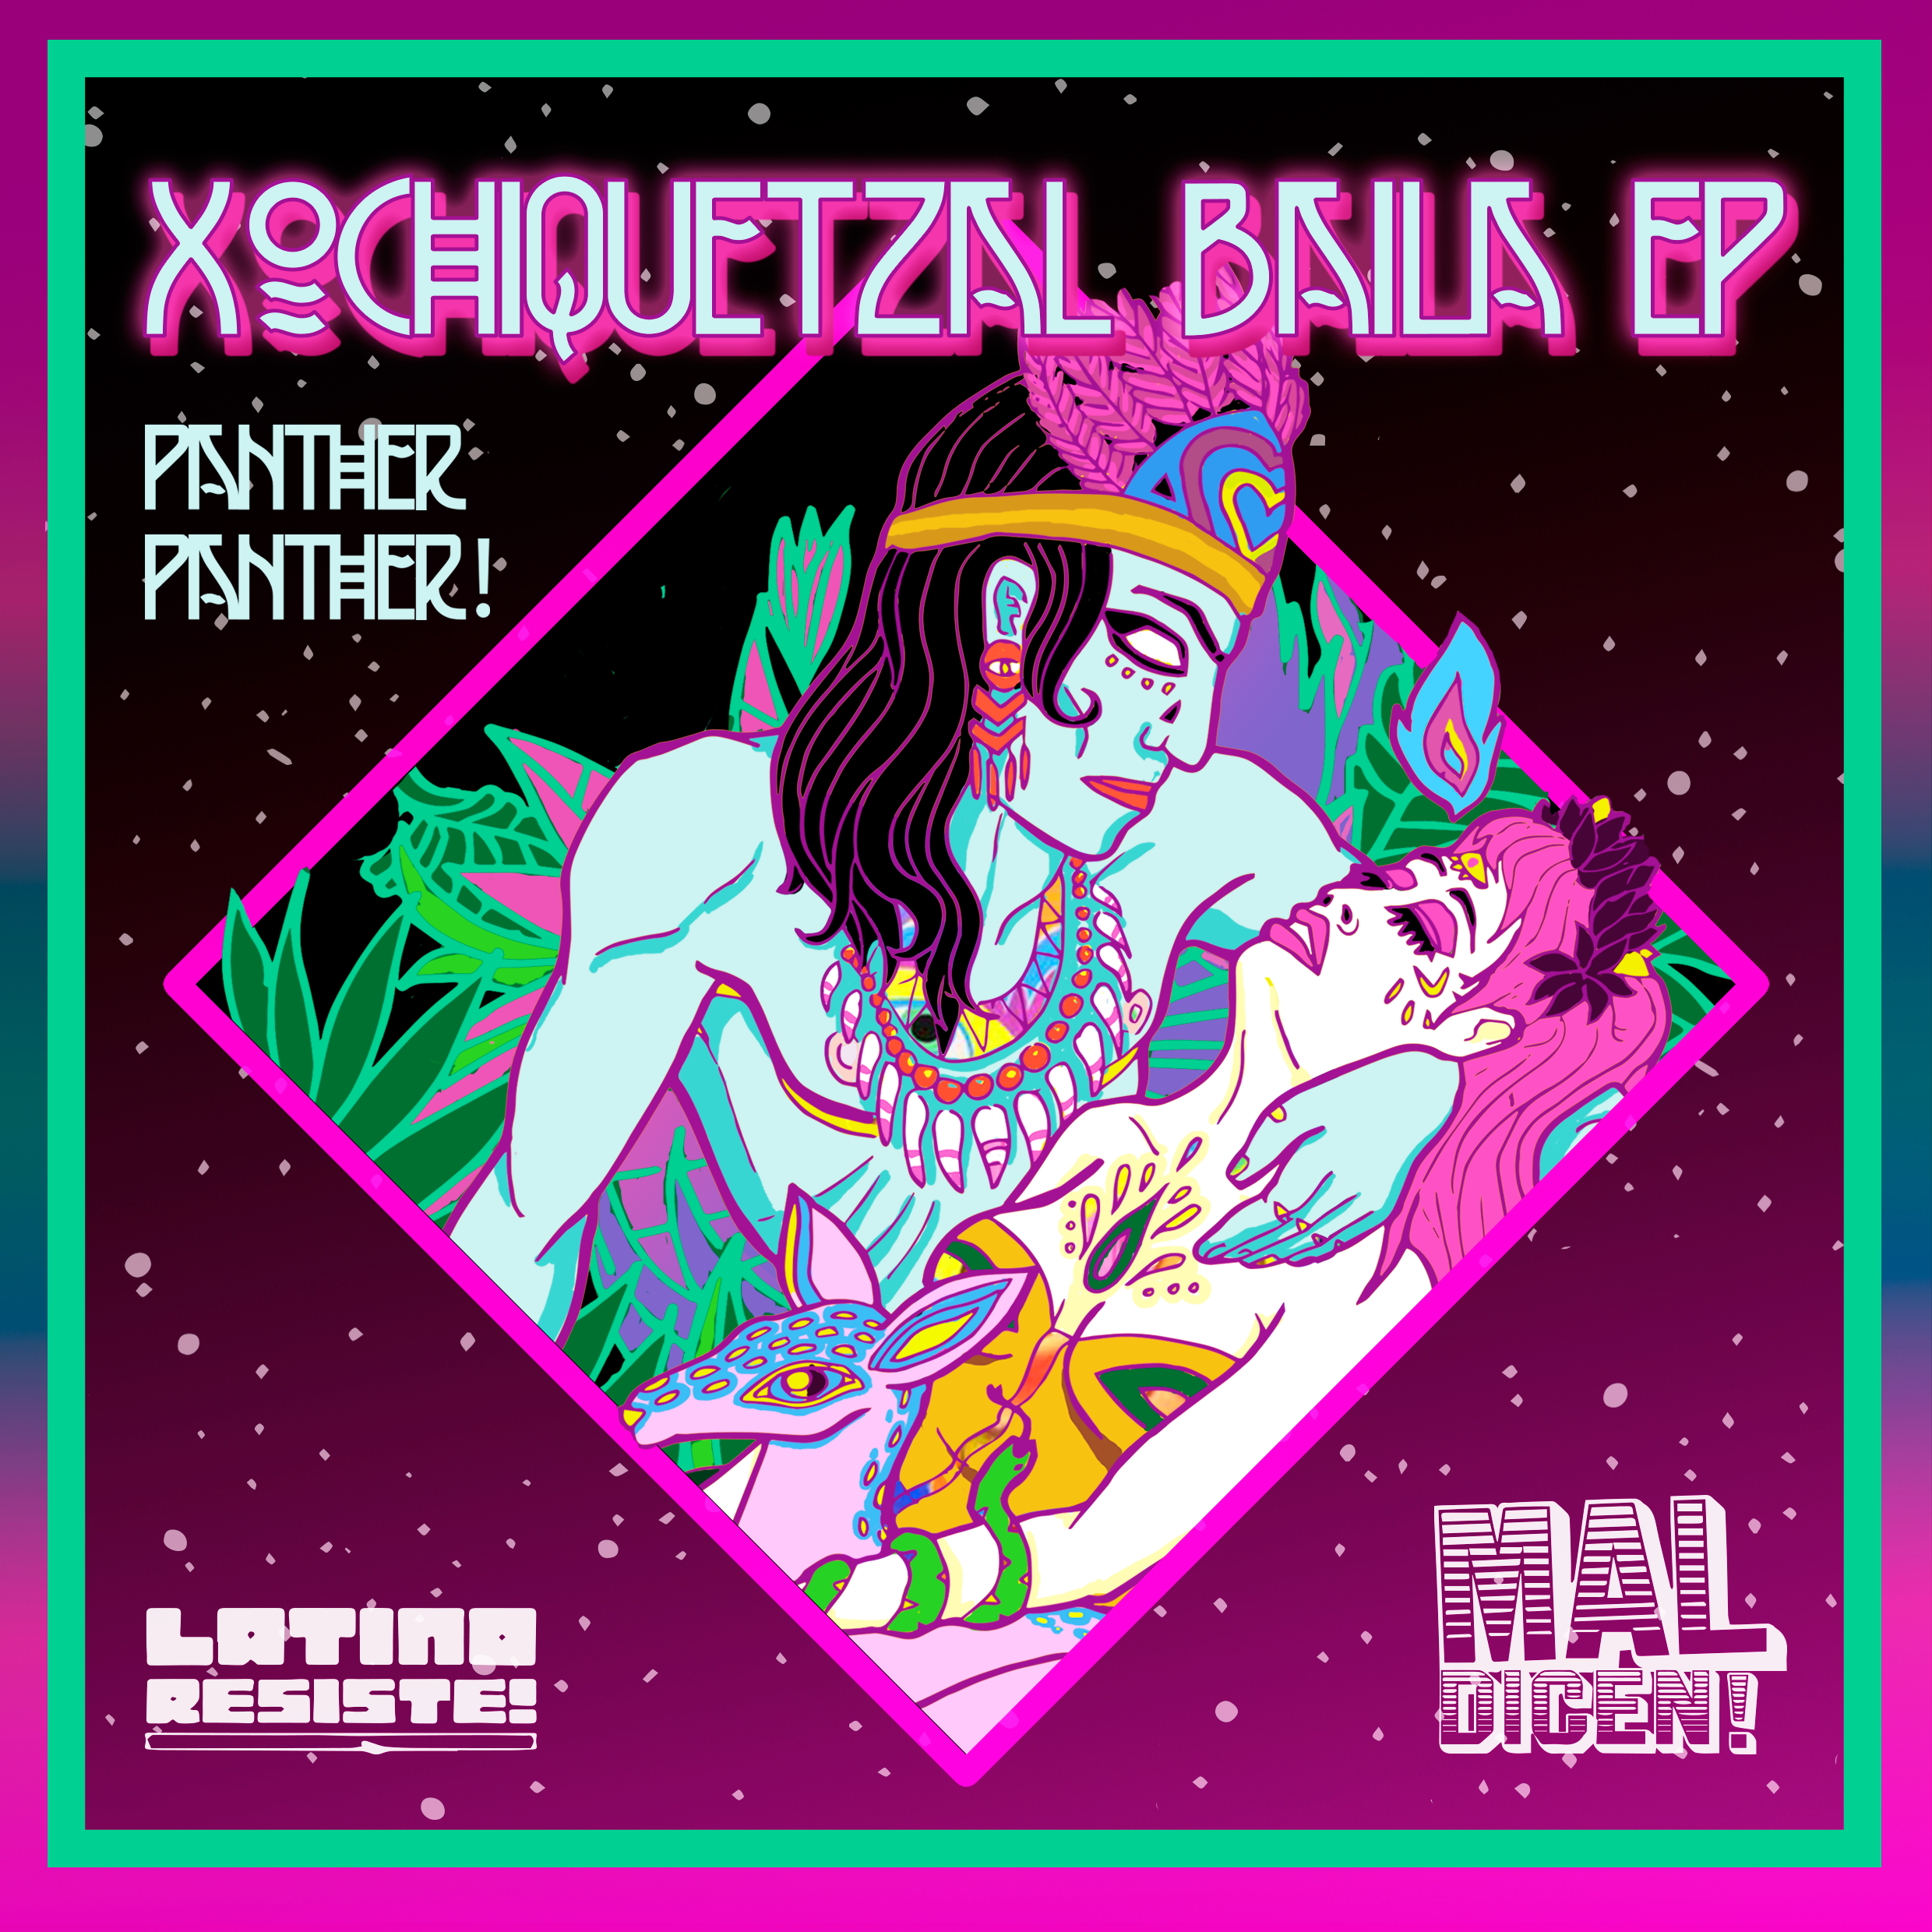 Latino Resiste - Panther Panther- Xochiquetzal Baila - cover.png